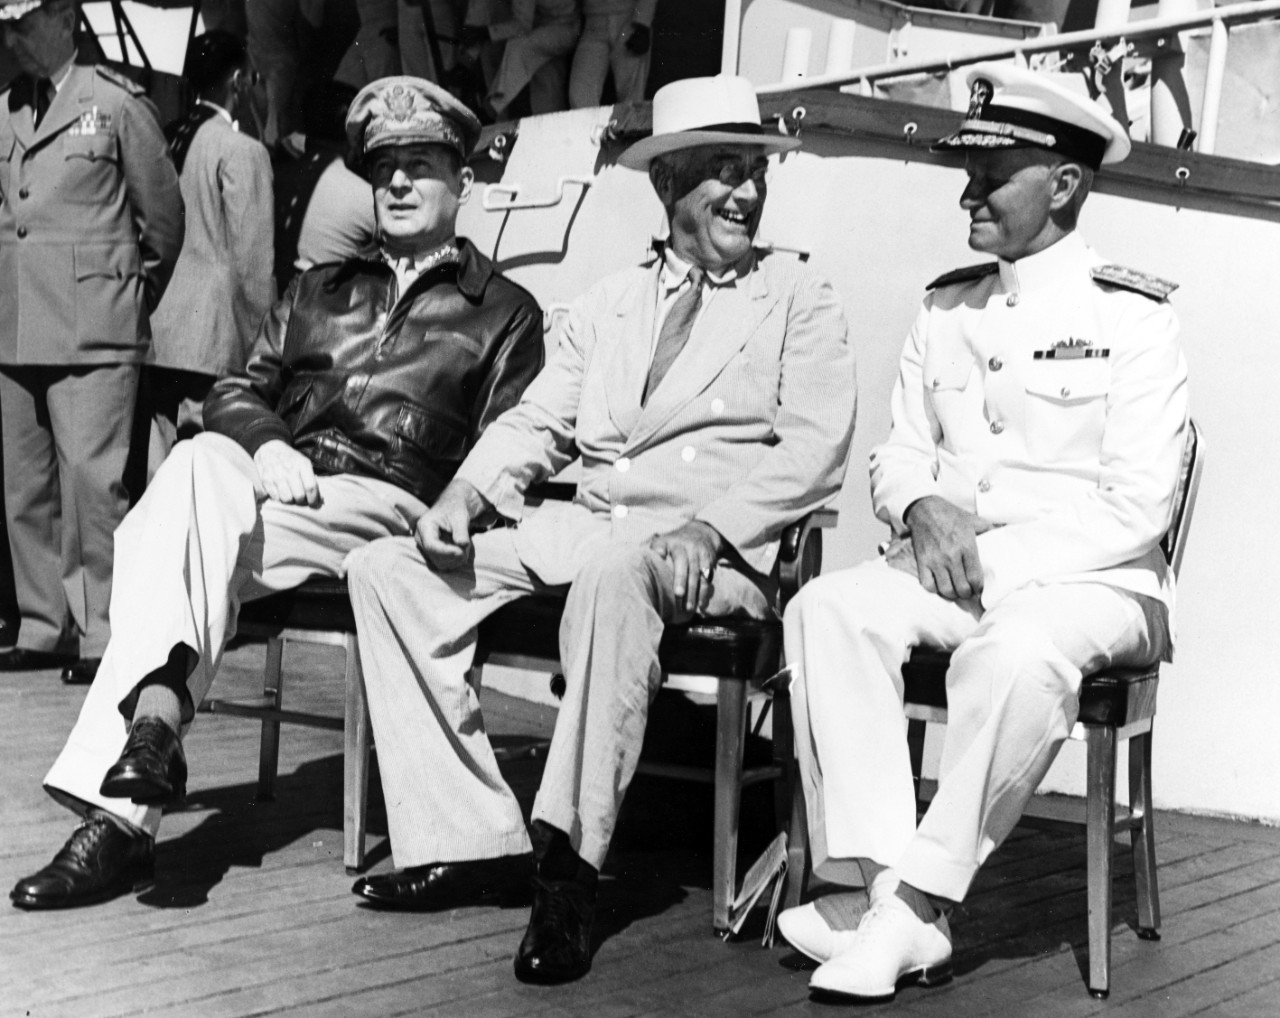 Photo #: 80-G-241479  General Douglas MacArthur, U.S. Army (left); President Franklin D. Roosevelt (center); and Admiral Chester W. Nimitz, USN (right)